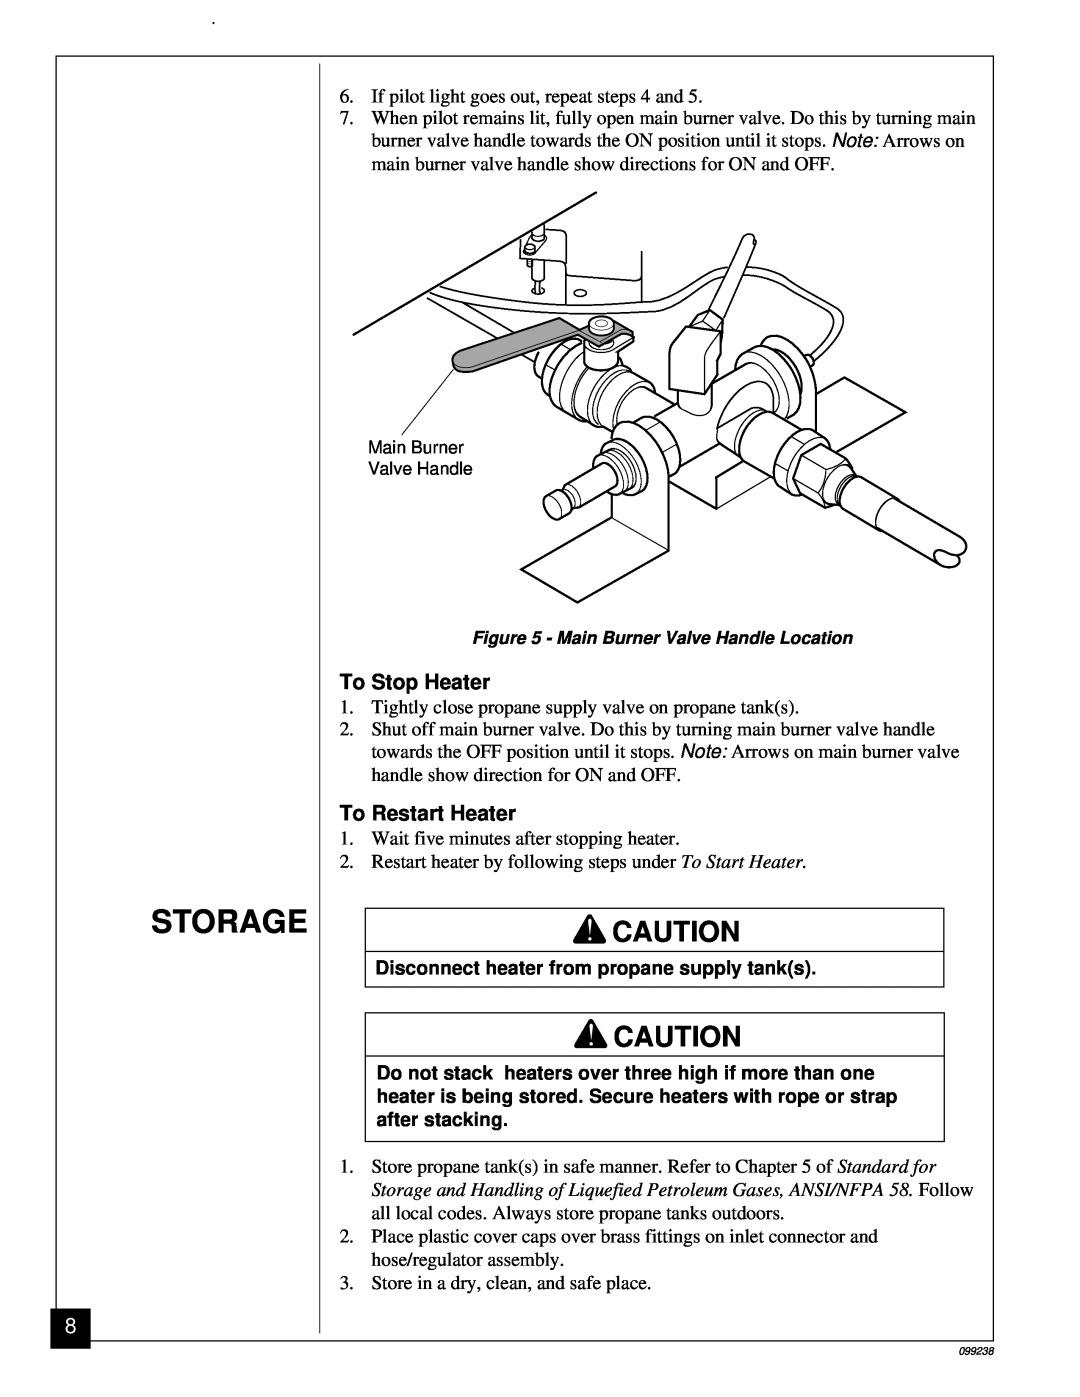 Homelite HP275 owner manual Storage, To Stop Heater, To Restart Heater, Disconnect heater from propane supply tanks 